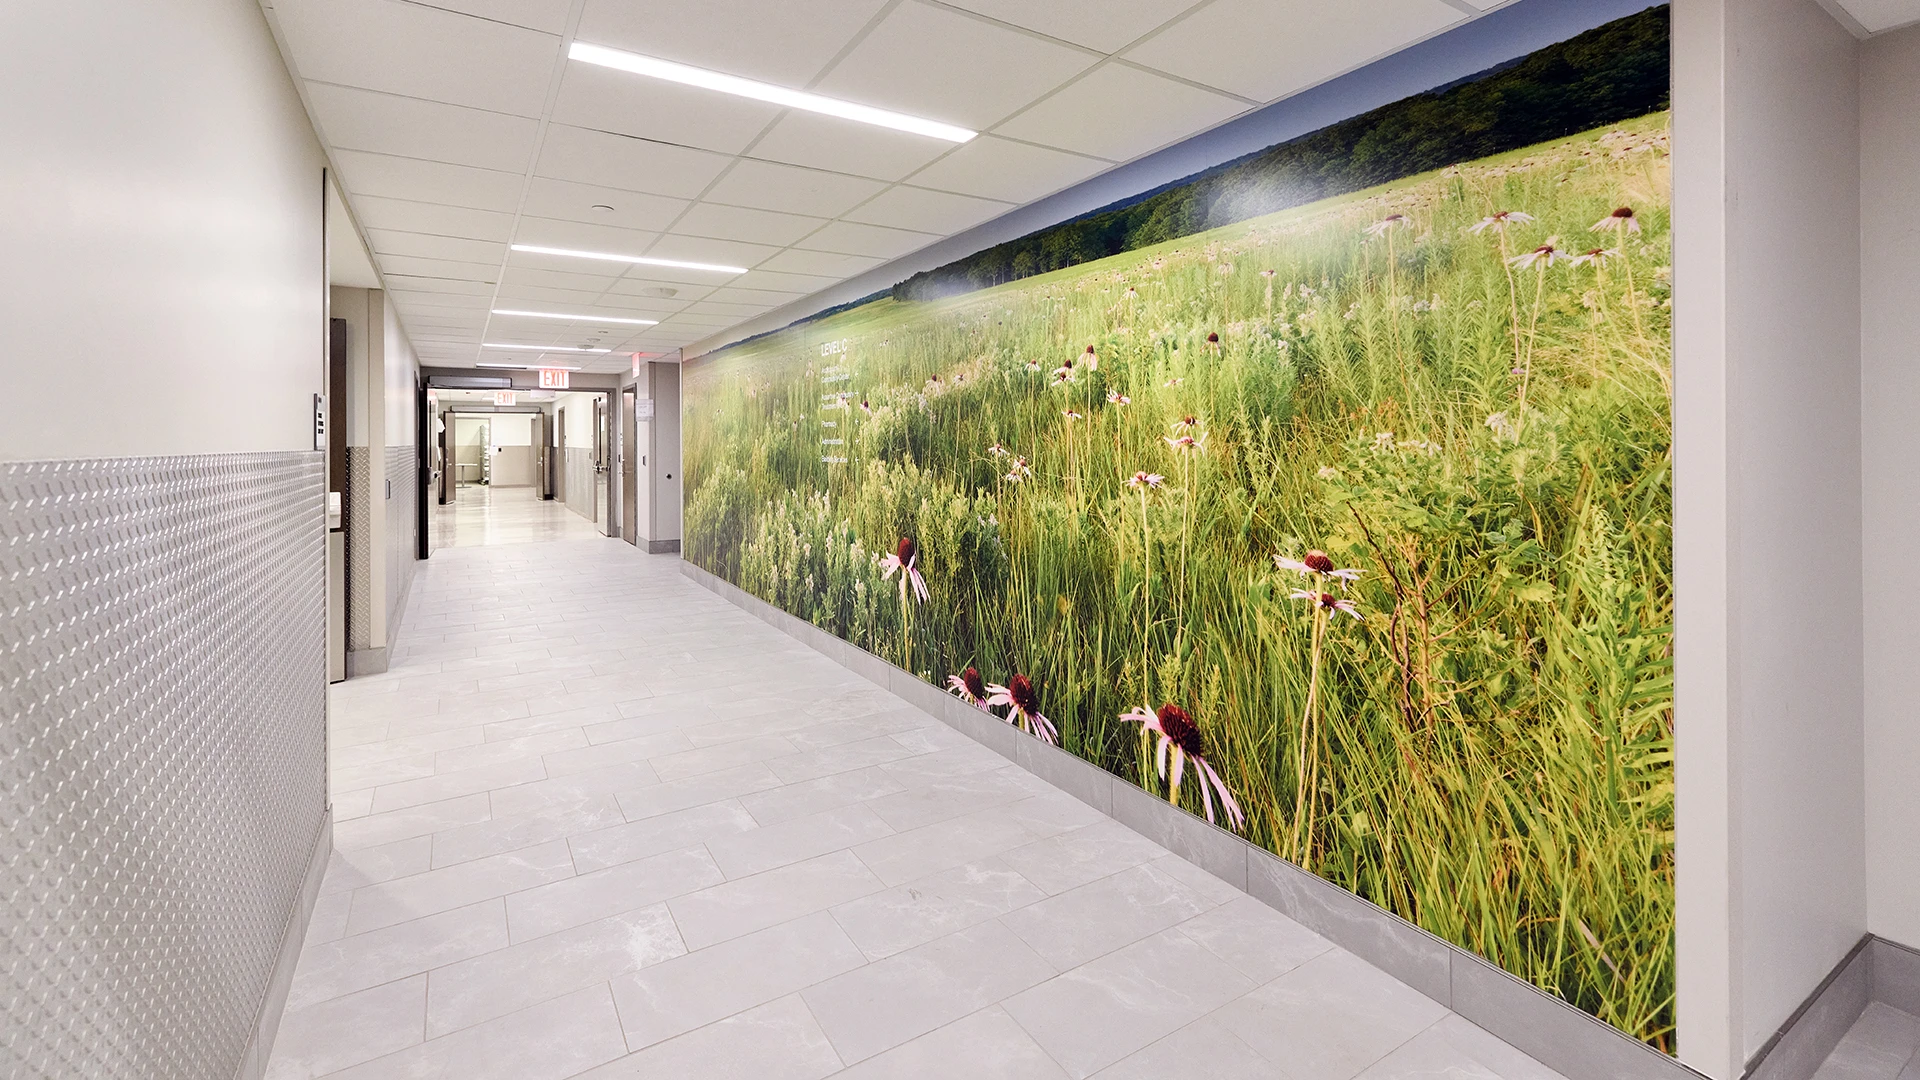 Mount Sinai worked with architects and designers to ensure that every room and hallway was welcoming to patients.